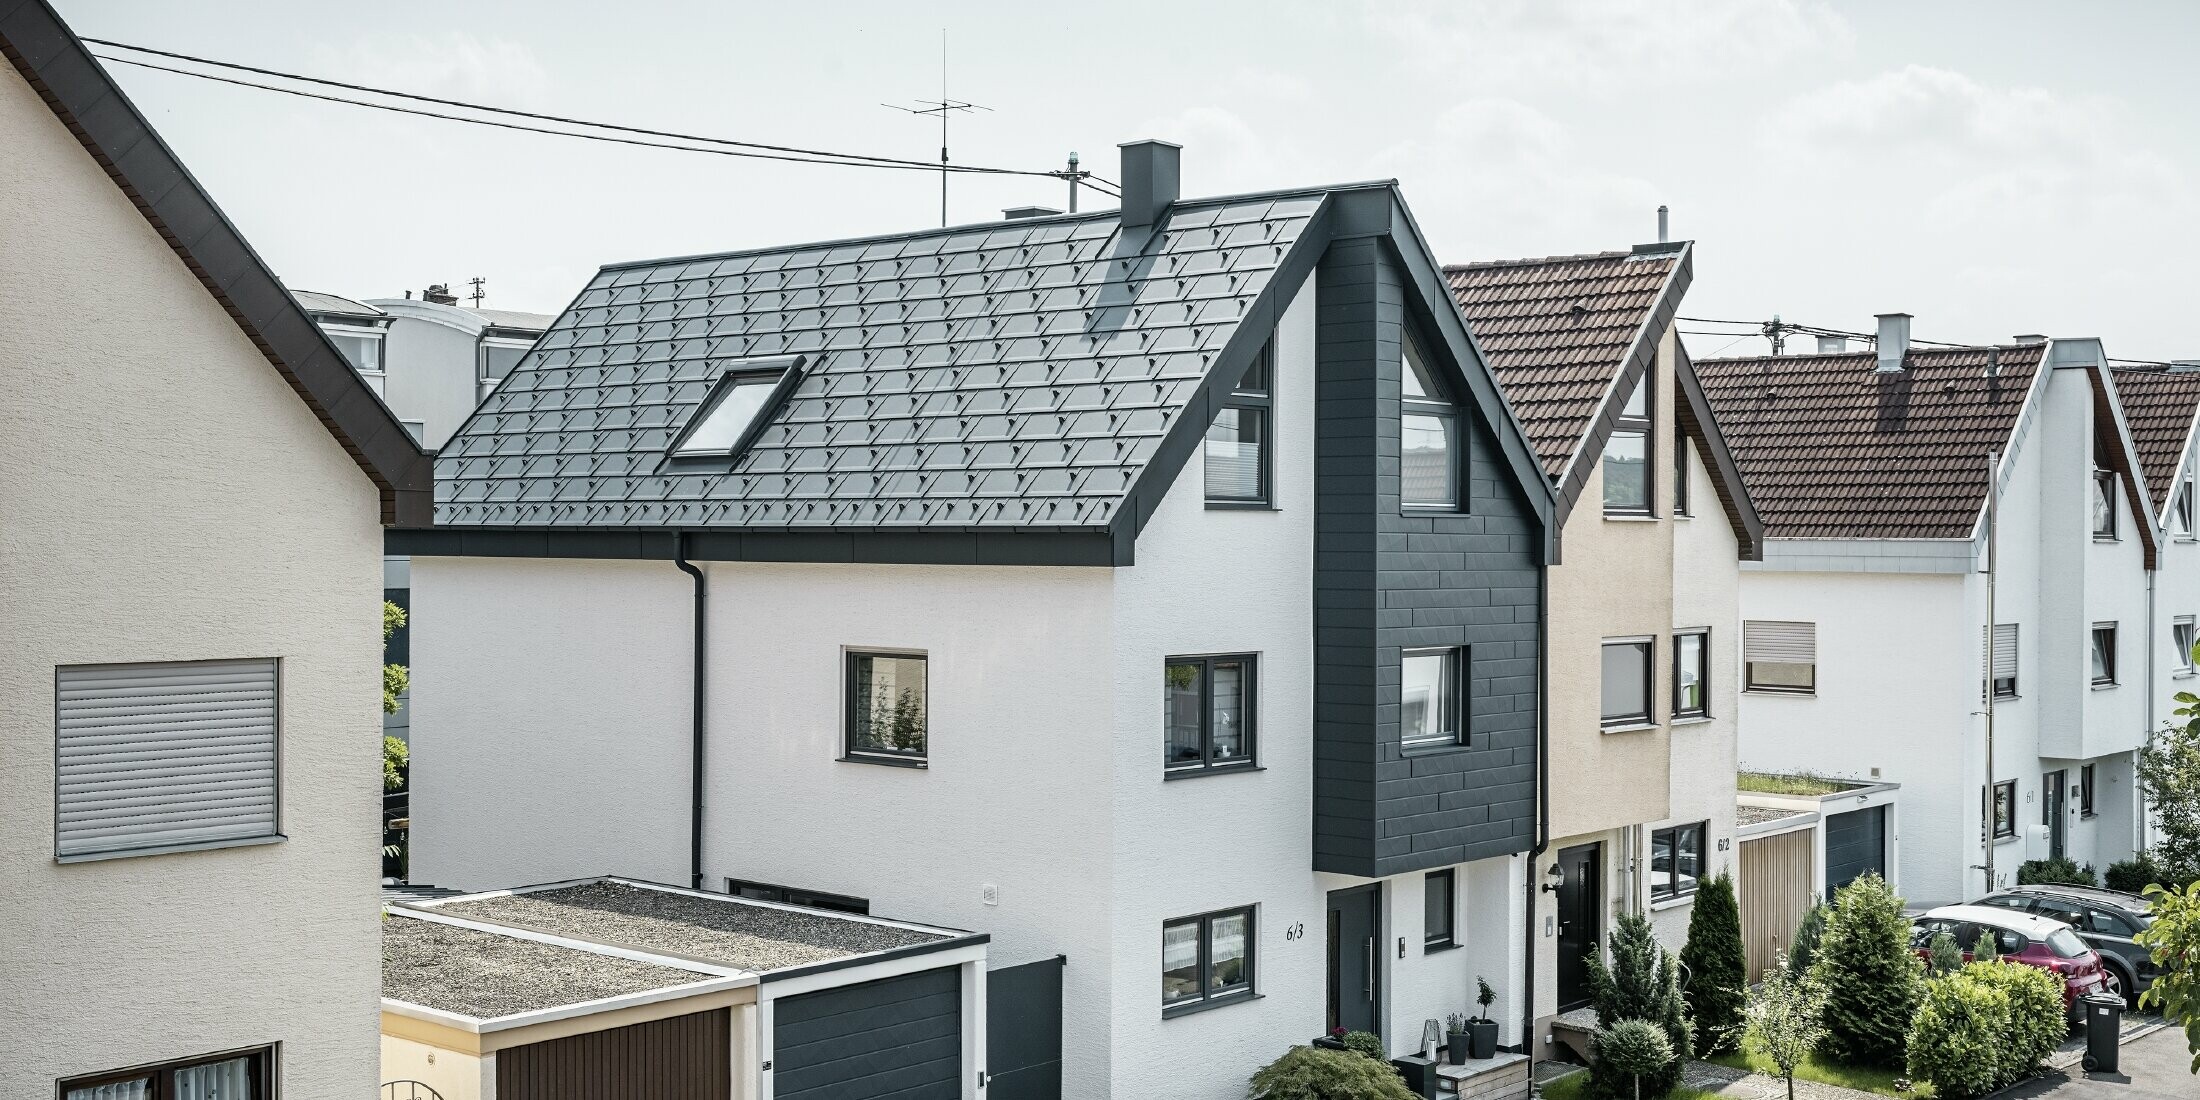 One semi-detached house has already been renovated, with a fresh white plaster façade, combined with a PREFA siding.X façade in anthracite. The roof was covered with PREFA roof tile R.16. The roof is drained via the square box gutter and the PREFA downpipe.